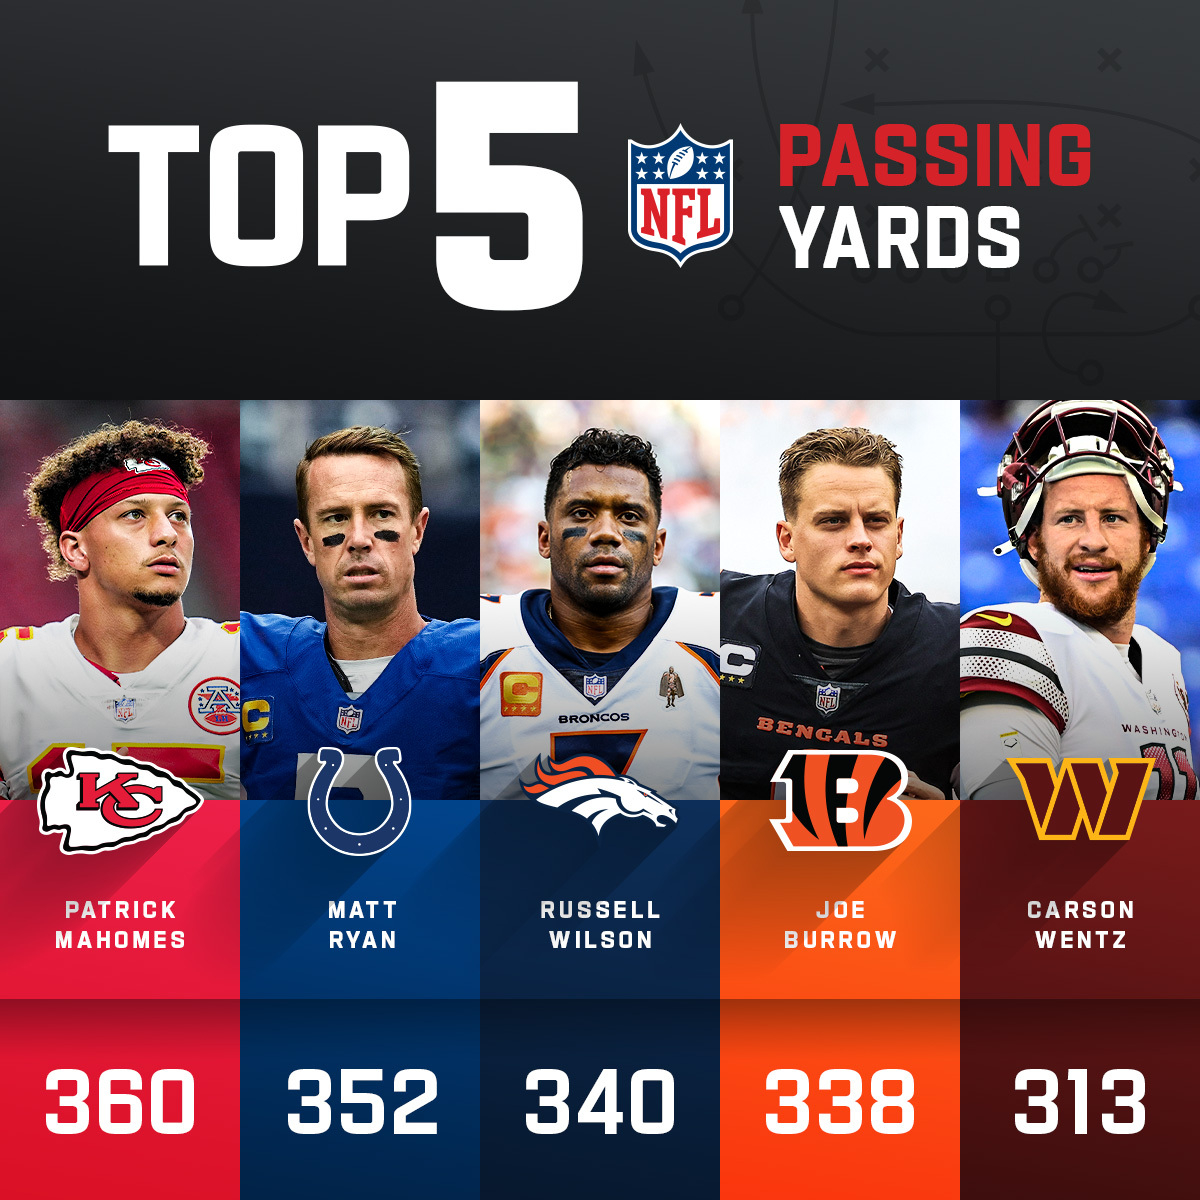 NFL on Twitter "The passing yards leaders through the first week